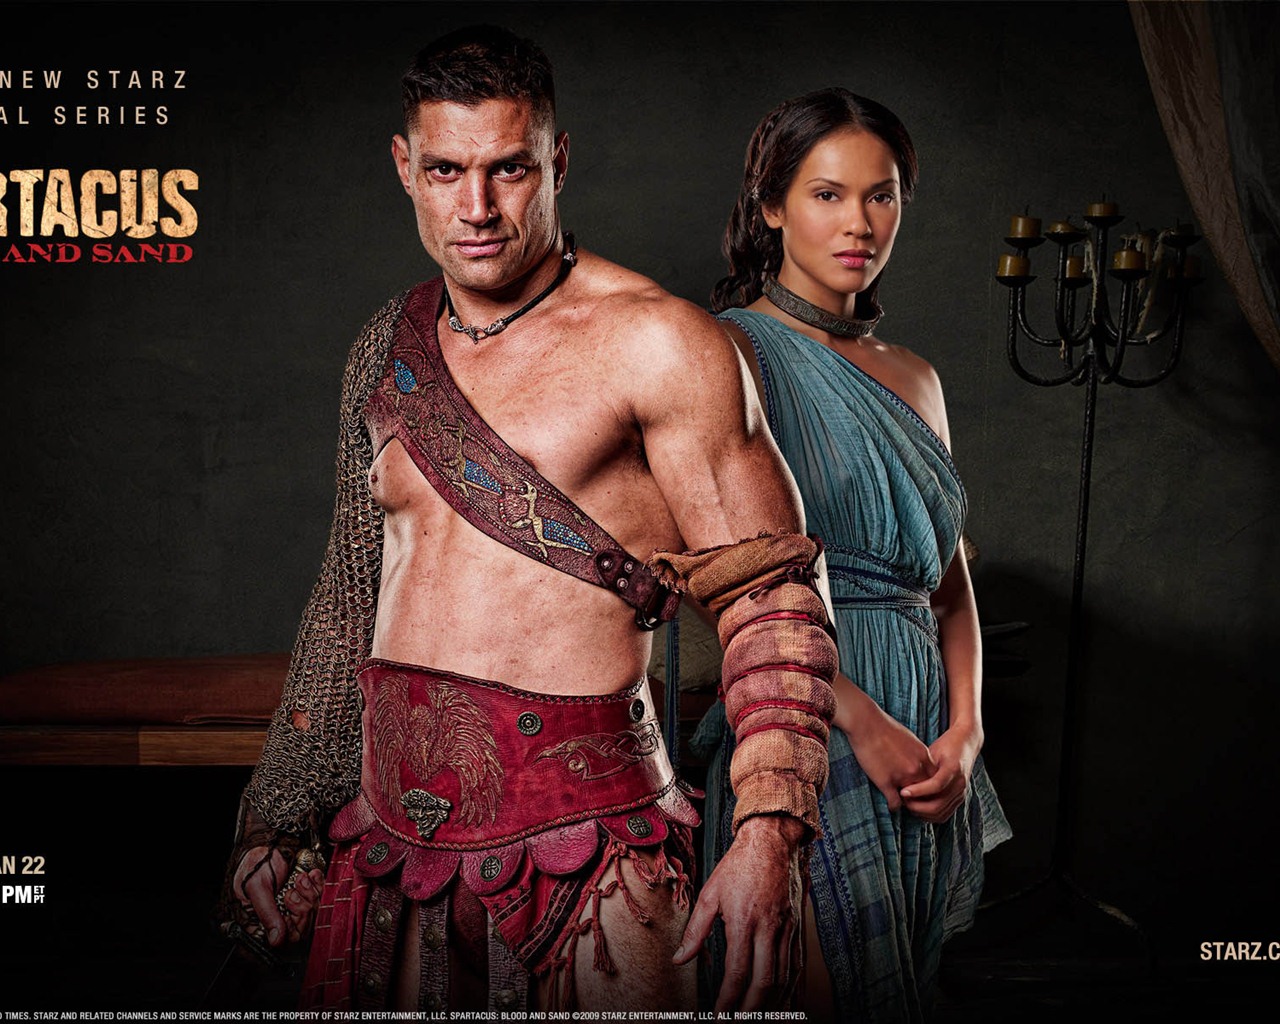 Spartacus: Blood and Sand HD Wallpaper #4 - 1280x1024